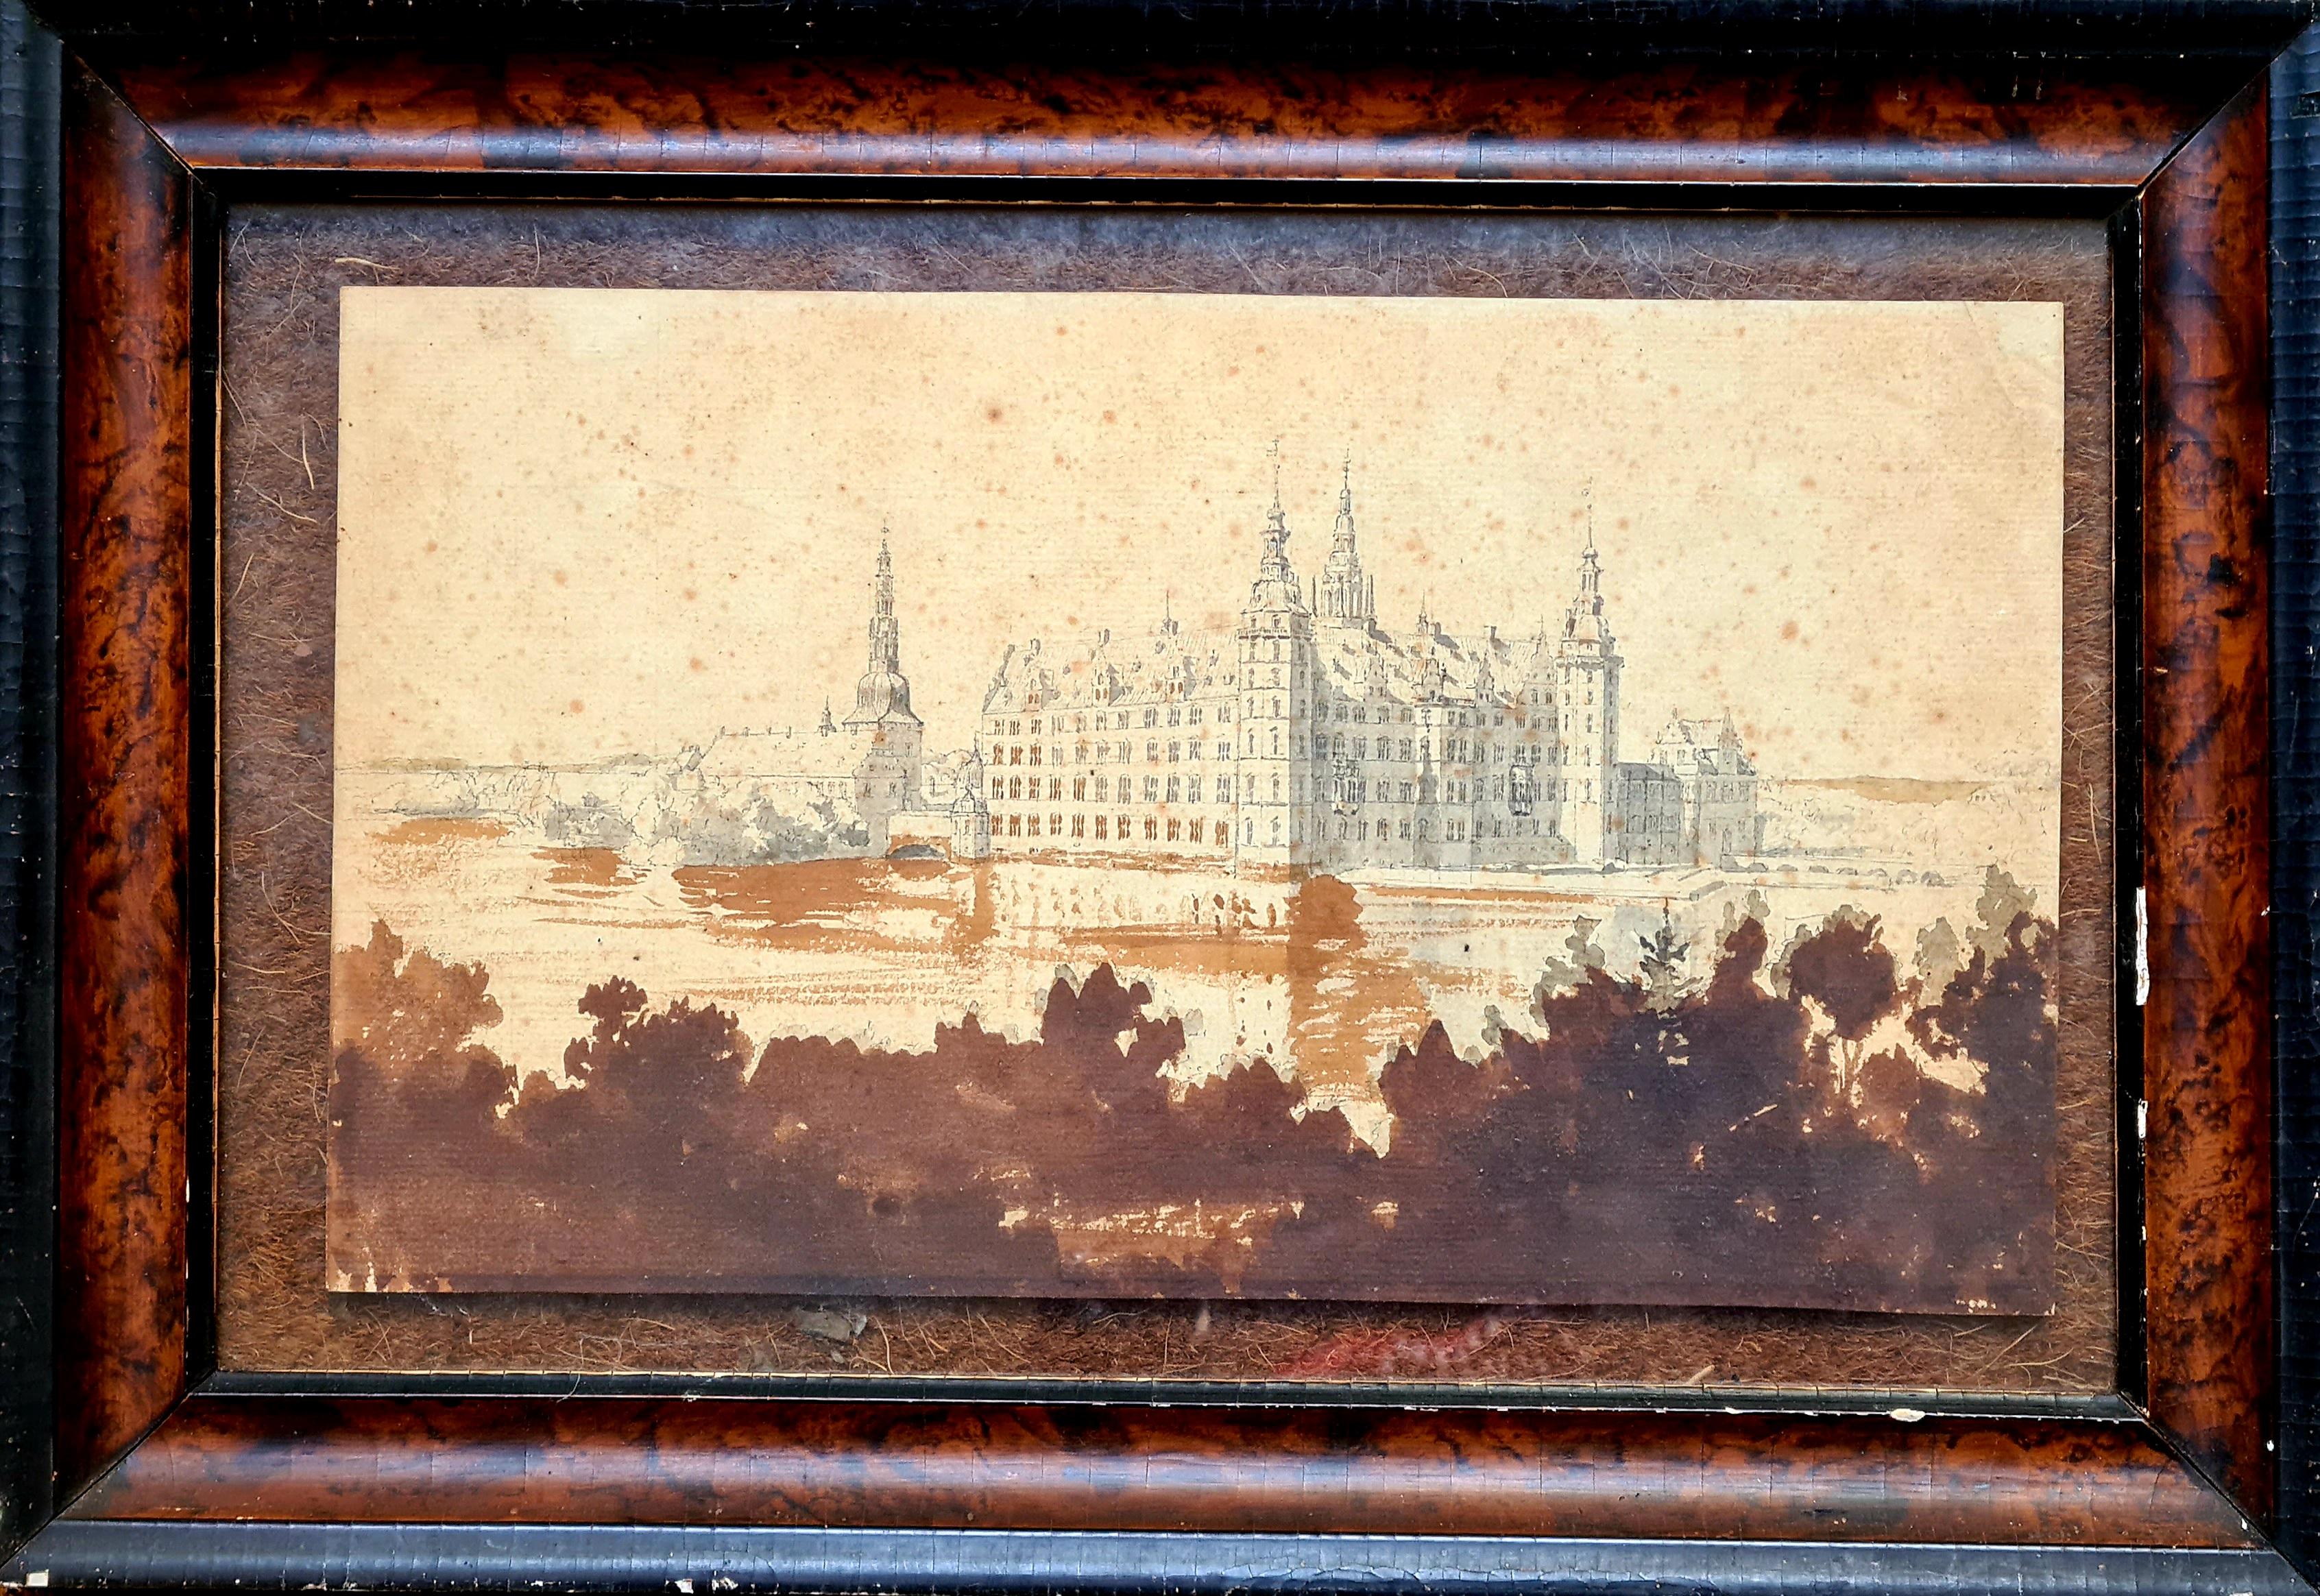 19th Century Architectural Danish Drawing & Watercolour of Frederiksborg Castle - Art by Thorald Læssøe